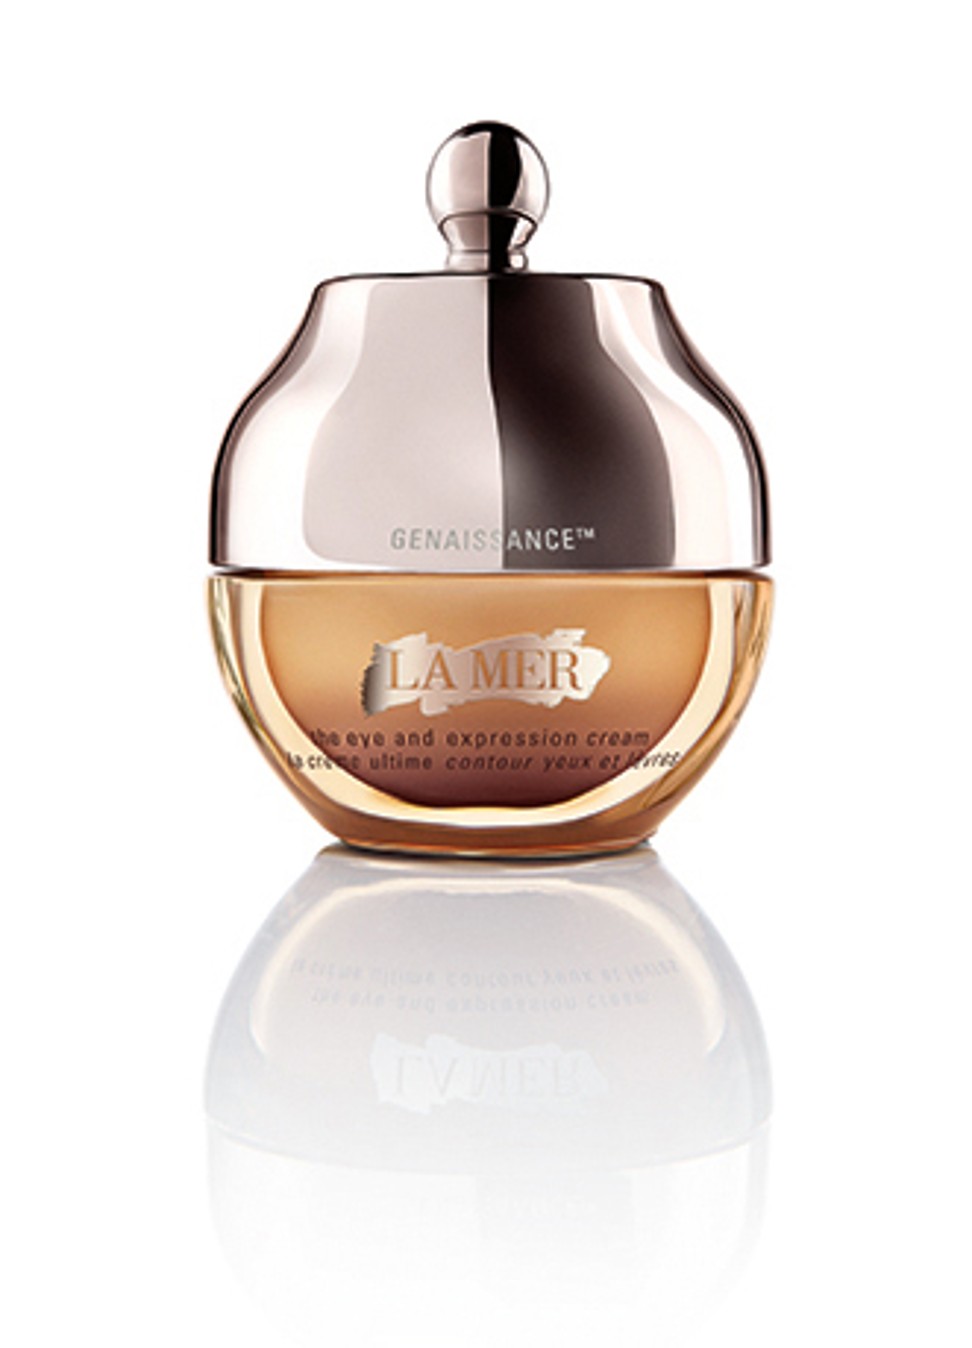 The Genaissance de la Mer collection has two new additions this month, one of which is the Eye and Expression Cream.